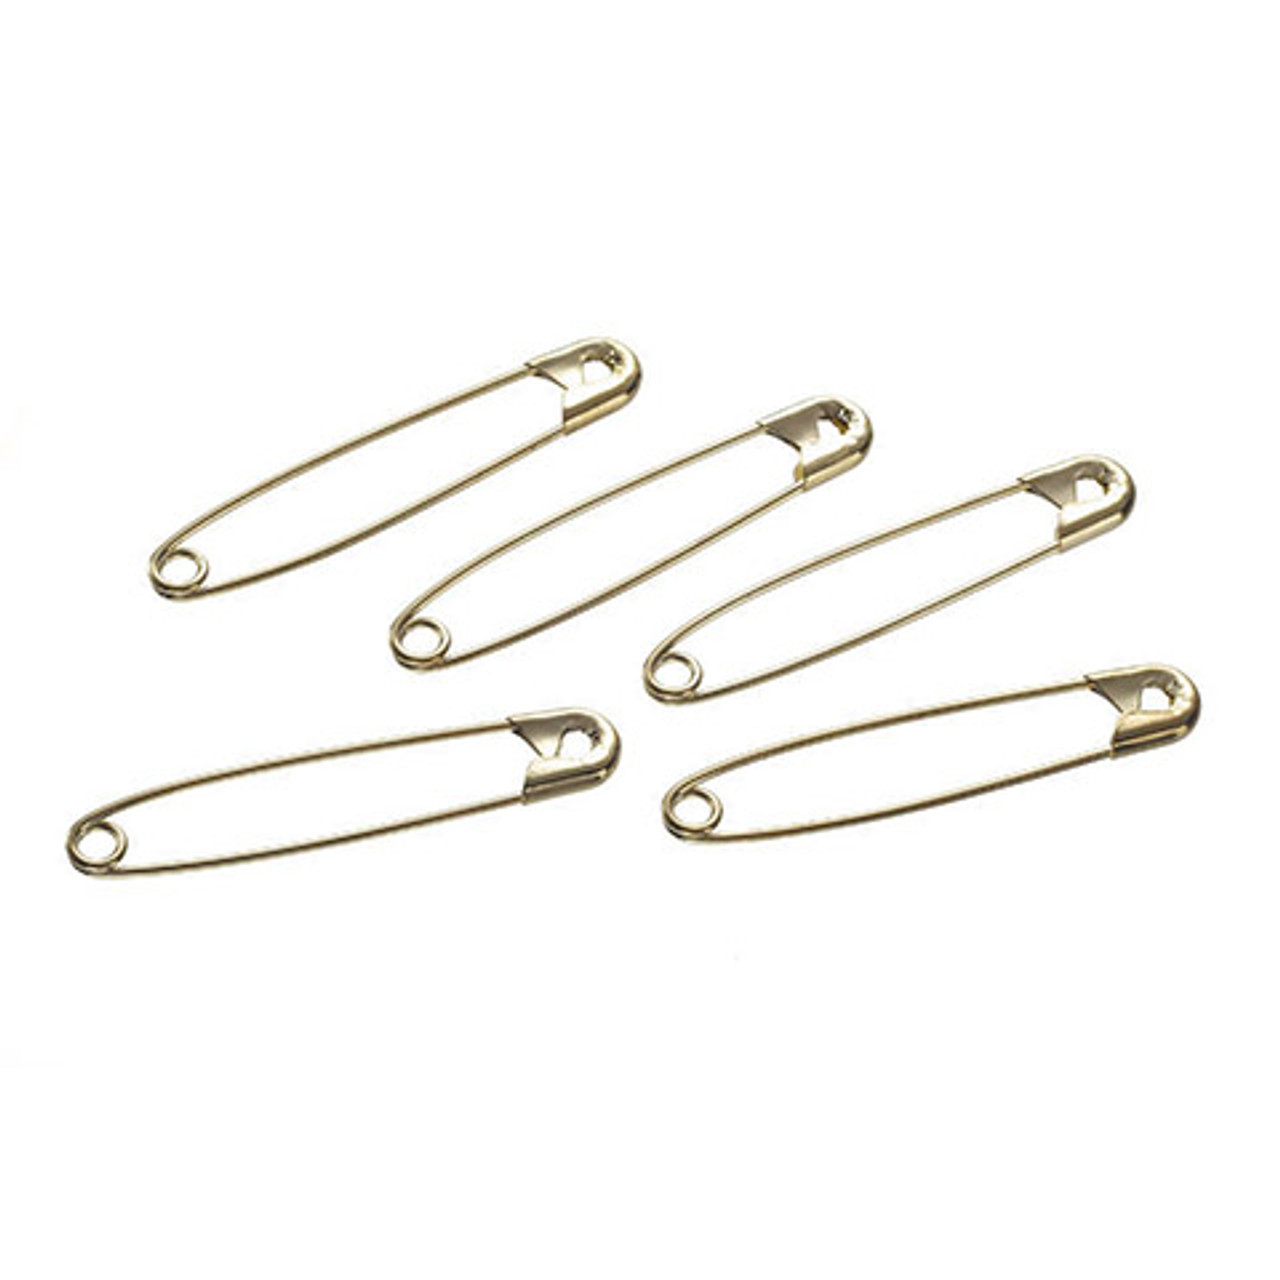 Safety Pins #4, Nickel, 2.25" long, Pack of 144